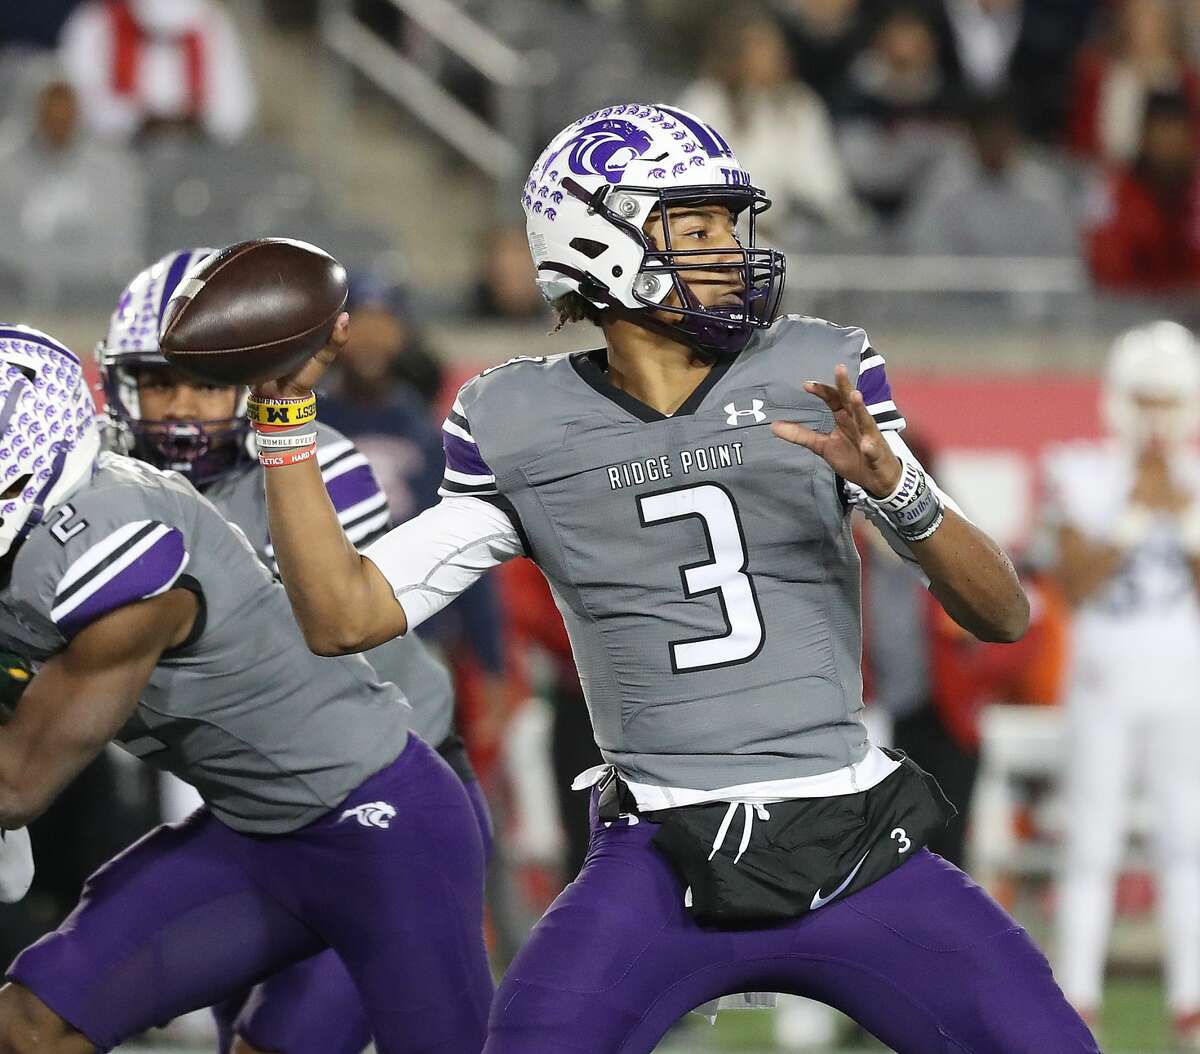 Ridge Point Panthers QB Bert Emanuel, Jr. (3) passes the ball during the first half of the Class 6A Division I regional semifinal game between Atascocita and Ridge Point high schools at TDECU Stadium, Friday, Nov. 26, 2021 in Houston.